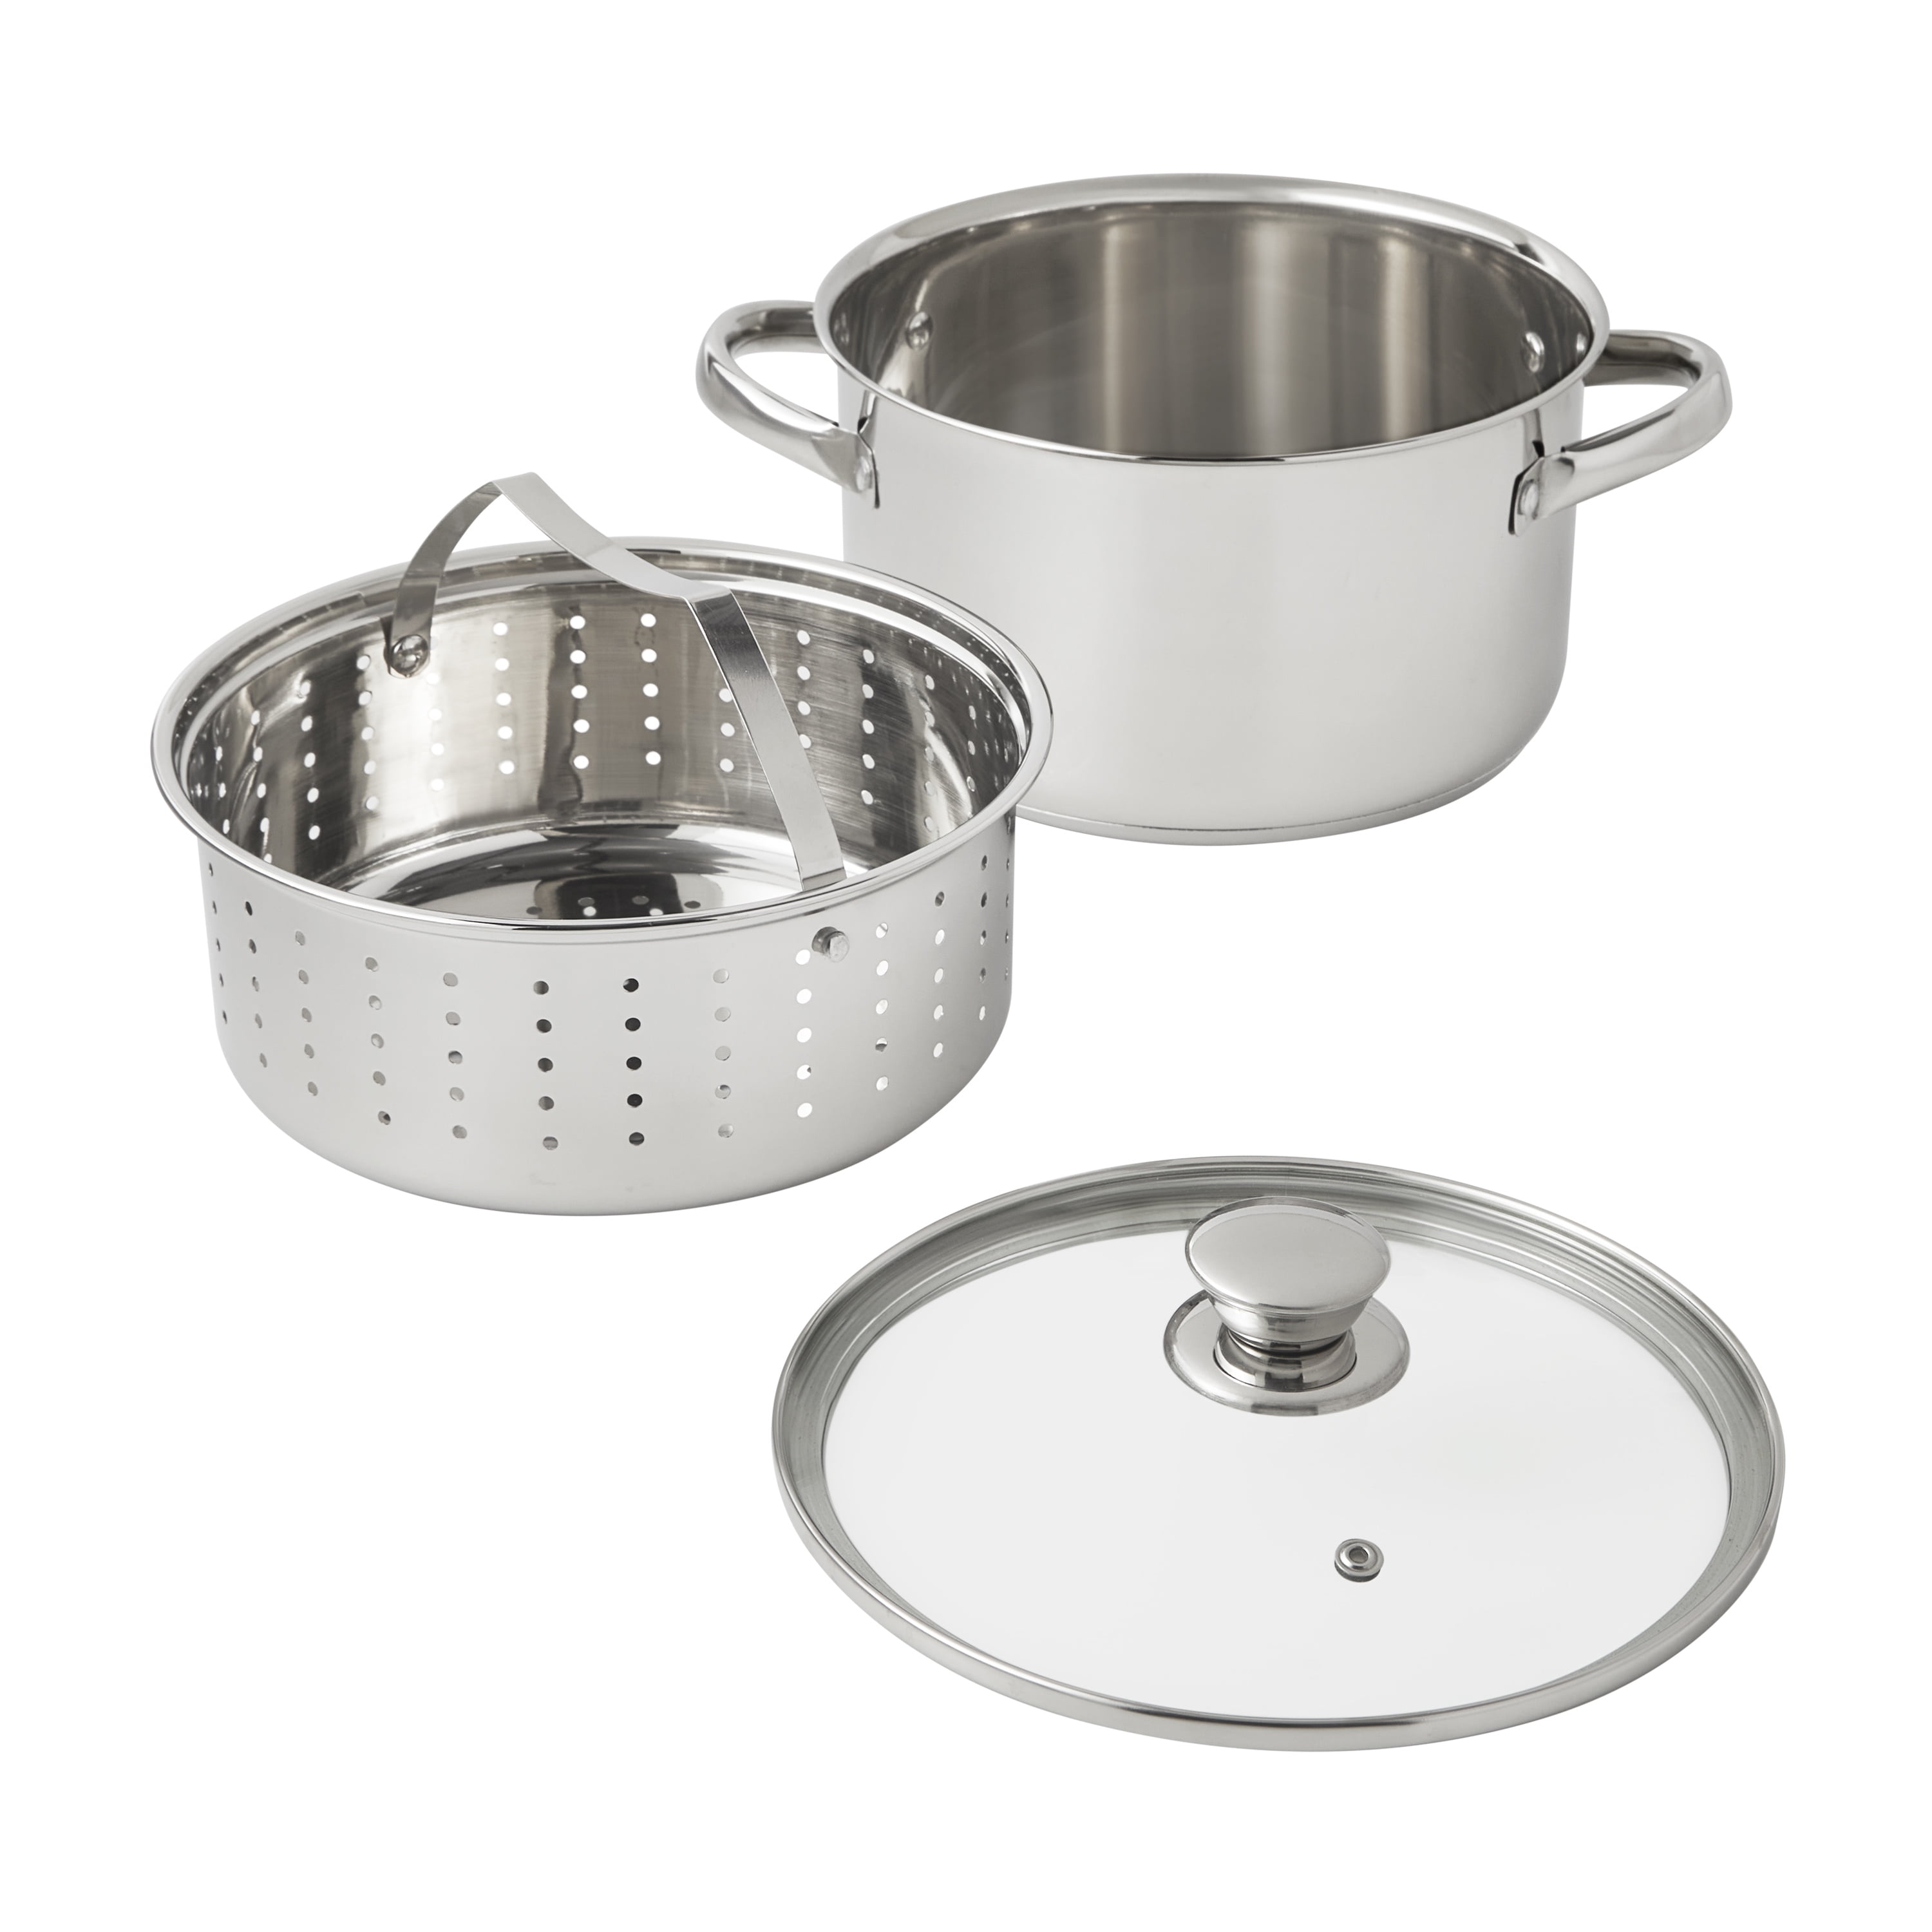 Angeles Home 4.2 qt. Stainless Steel Stock Pot in Silver with 2 qt. Steamer Insert and Lid